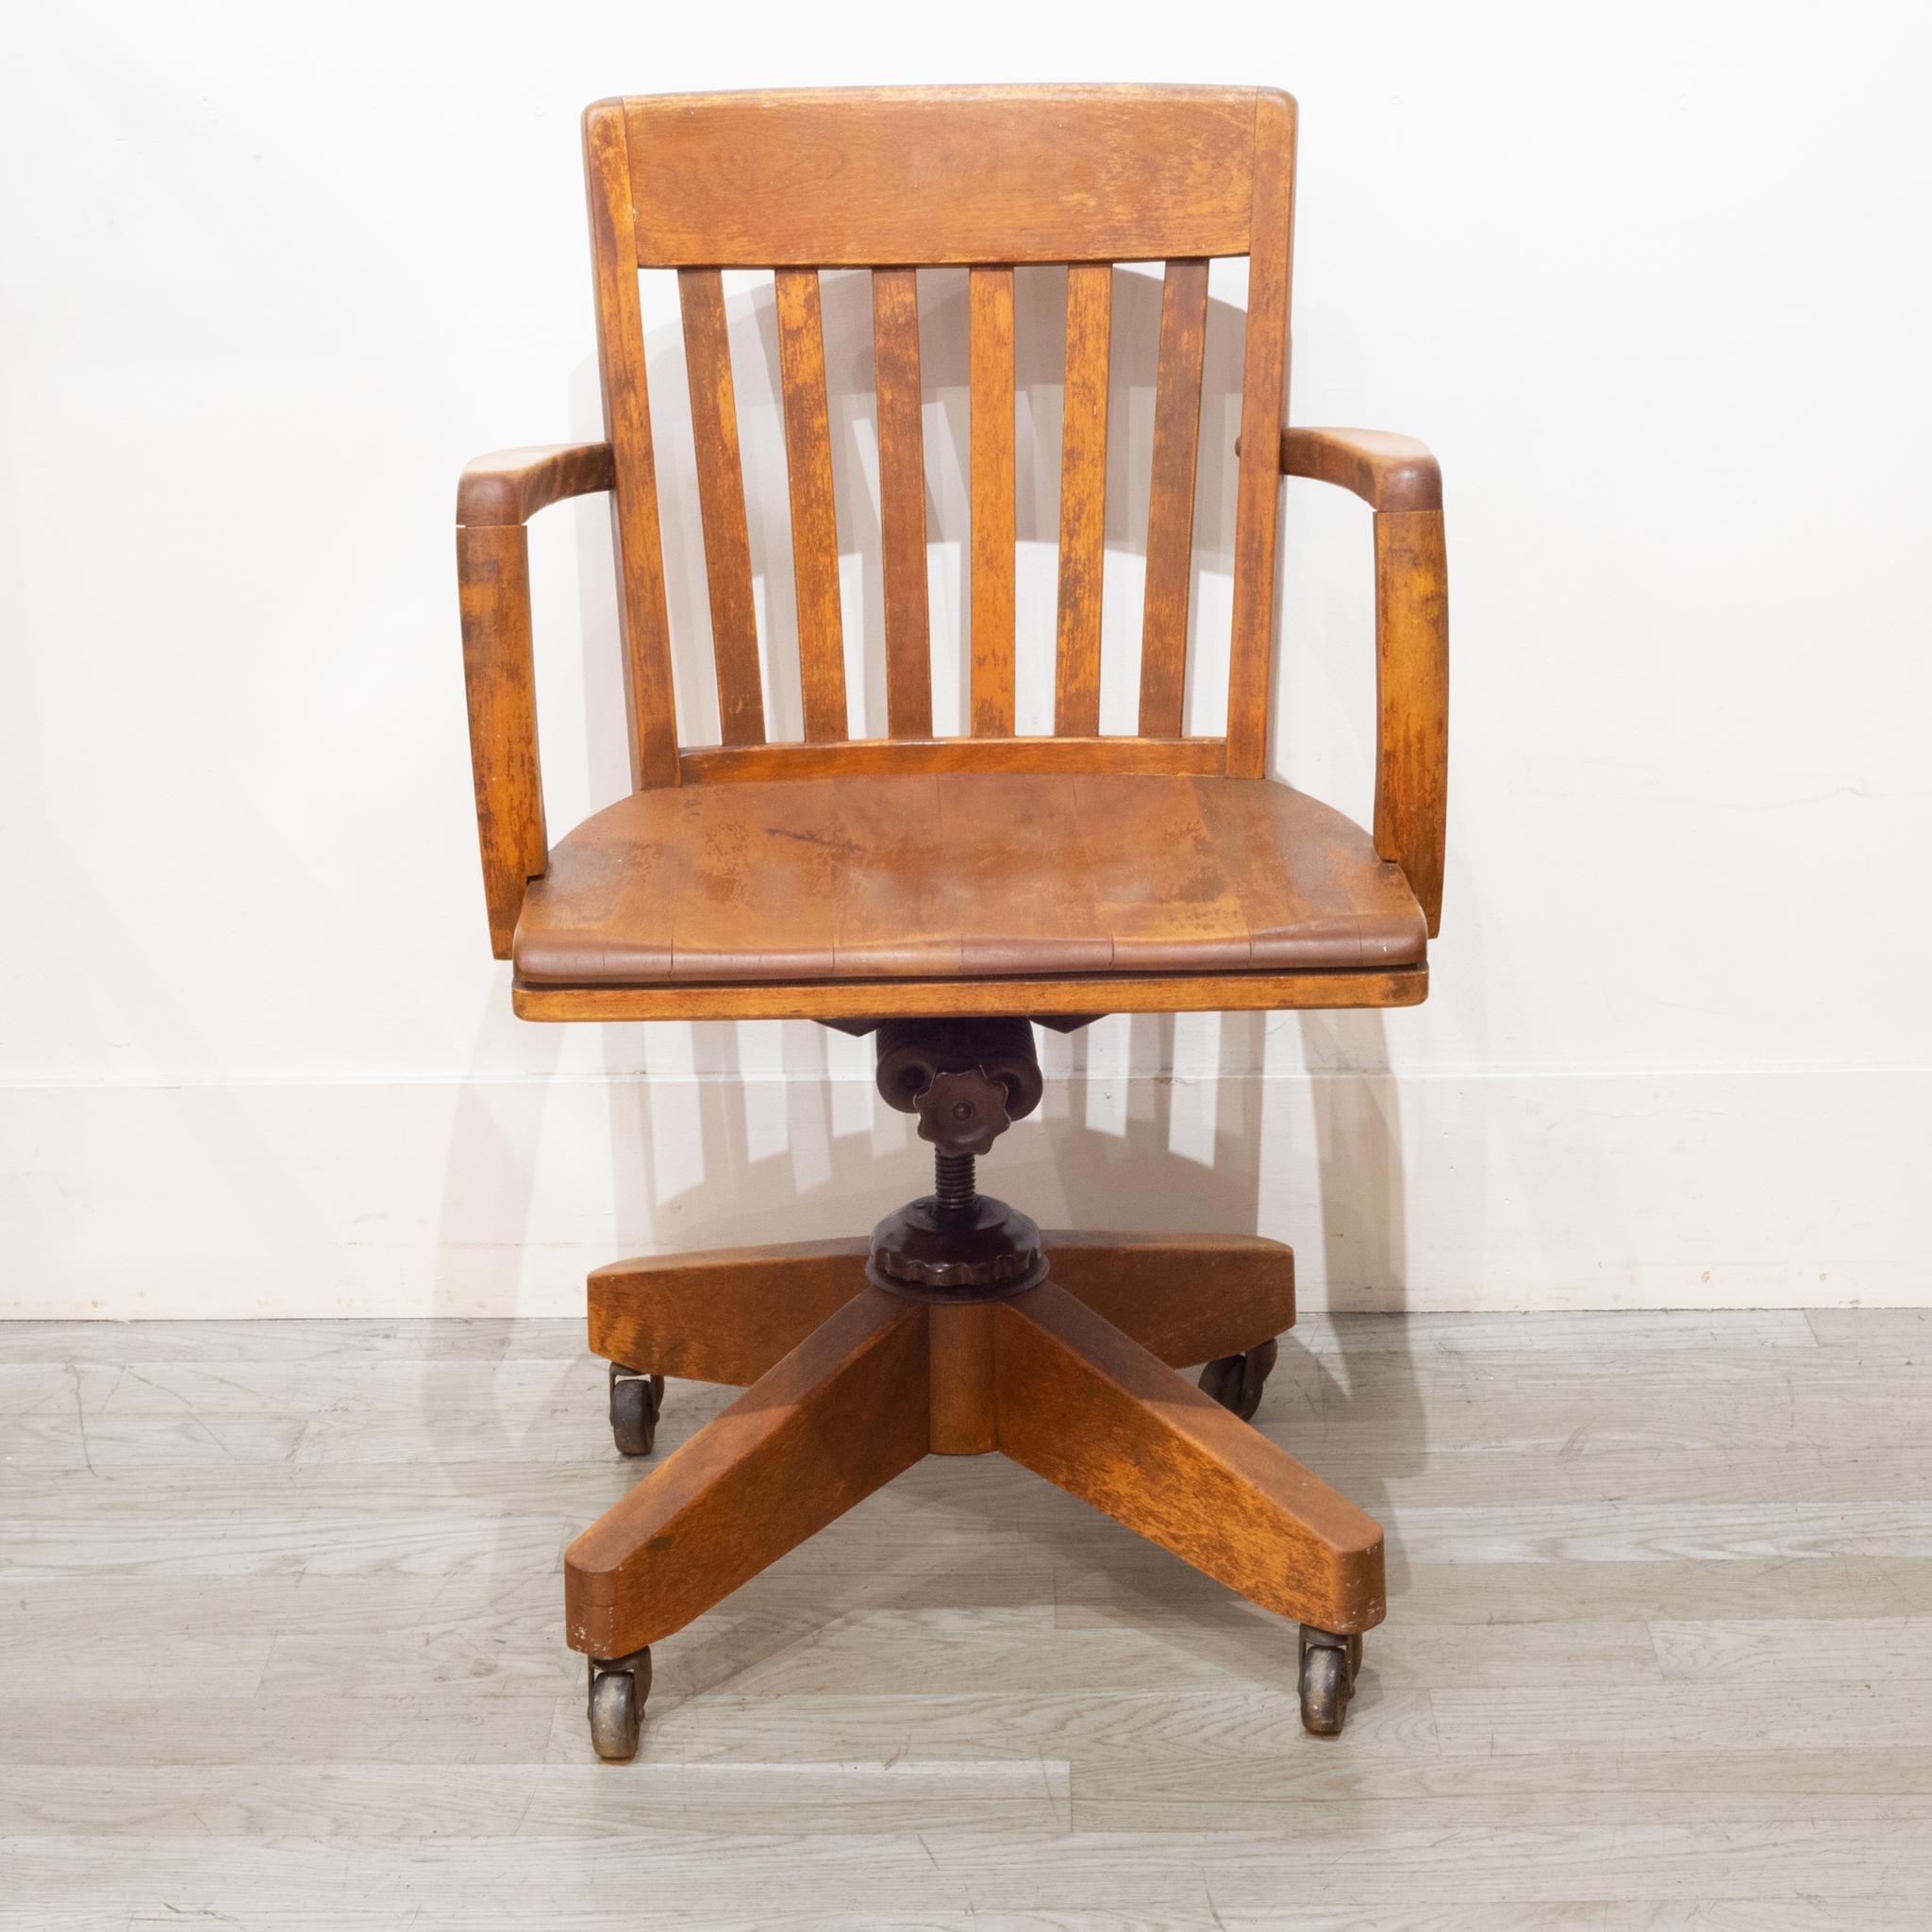 About

This is an original adjustable solid oak desk chair with brass casters and cast iron mechanism. This chair swivels, tilts back and the height is adjustable. This chair has retained its original finish and has minor structural